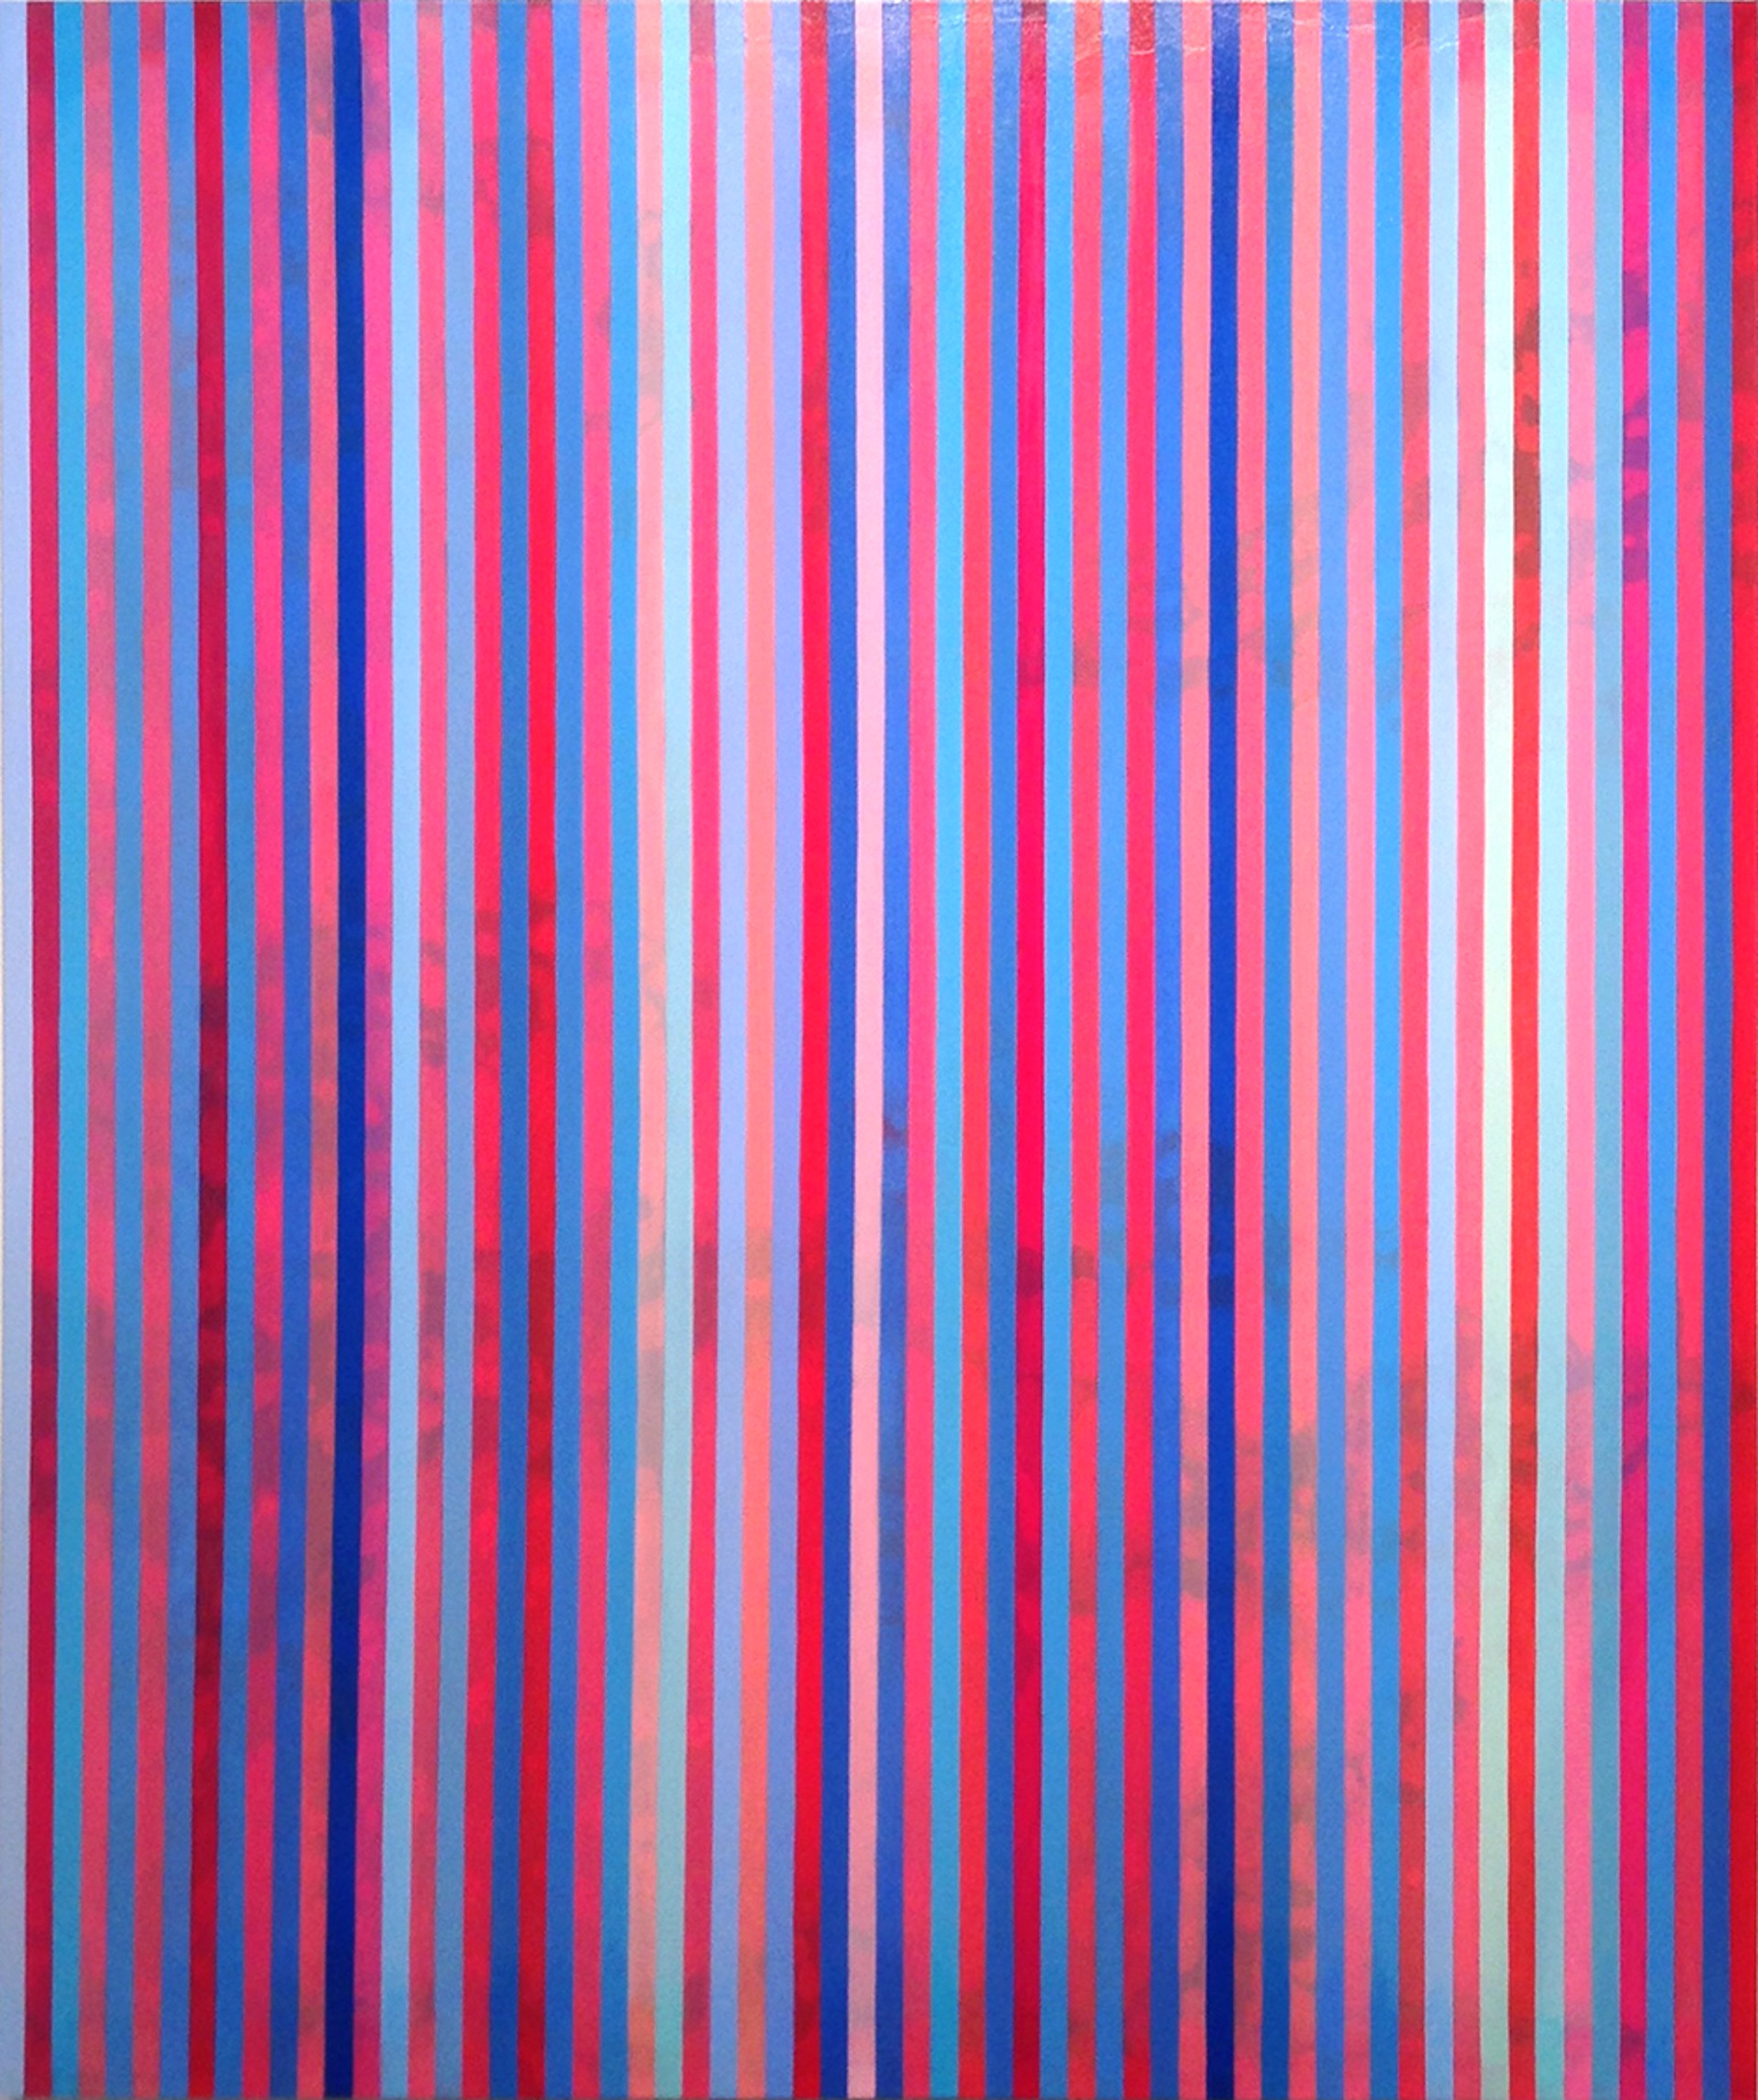 Vertical Lines by Suzanne Frazier